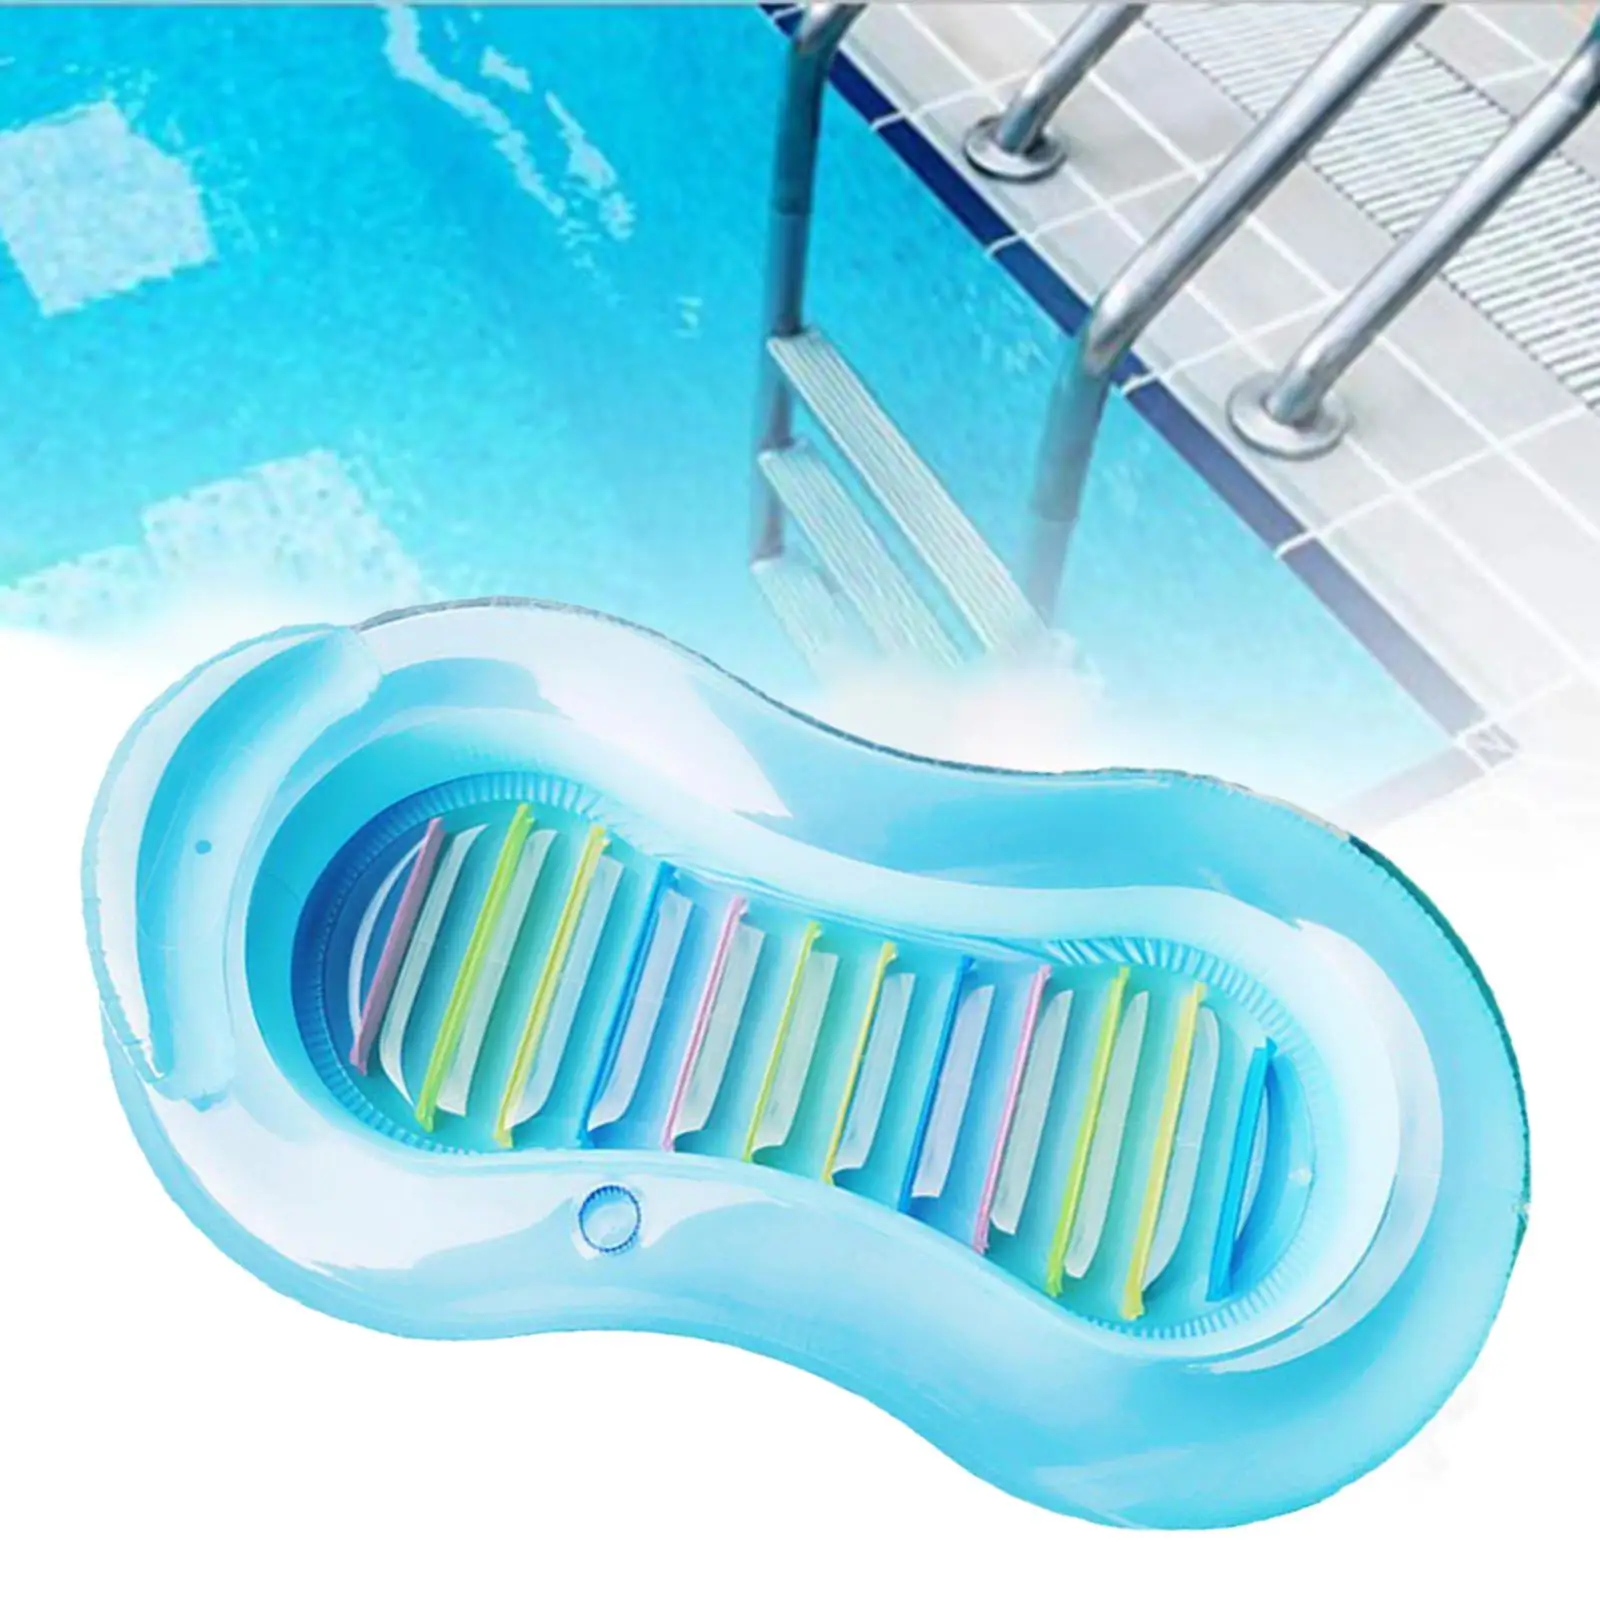 PVC Pool Floats Pool Floats Lounge Water Mattress Mat Floating Rafts Inflatable Hammock for Pool